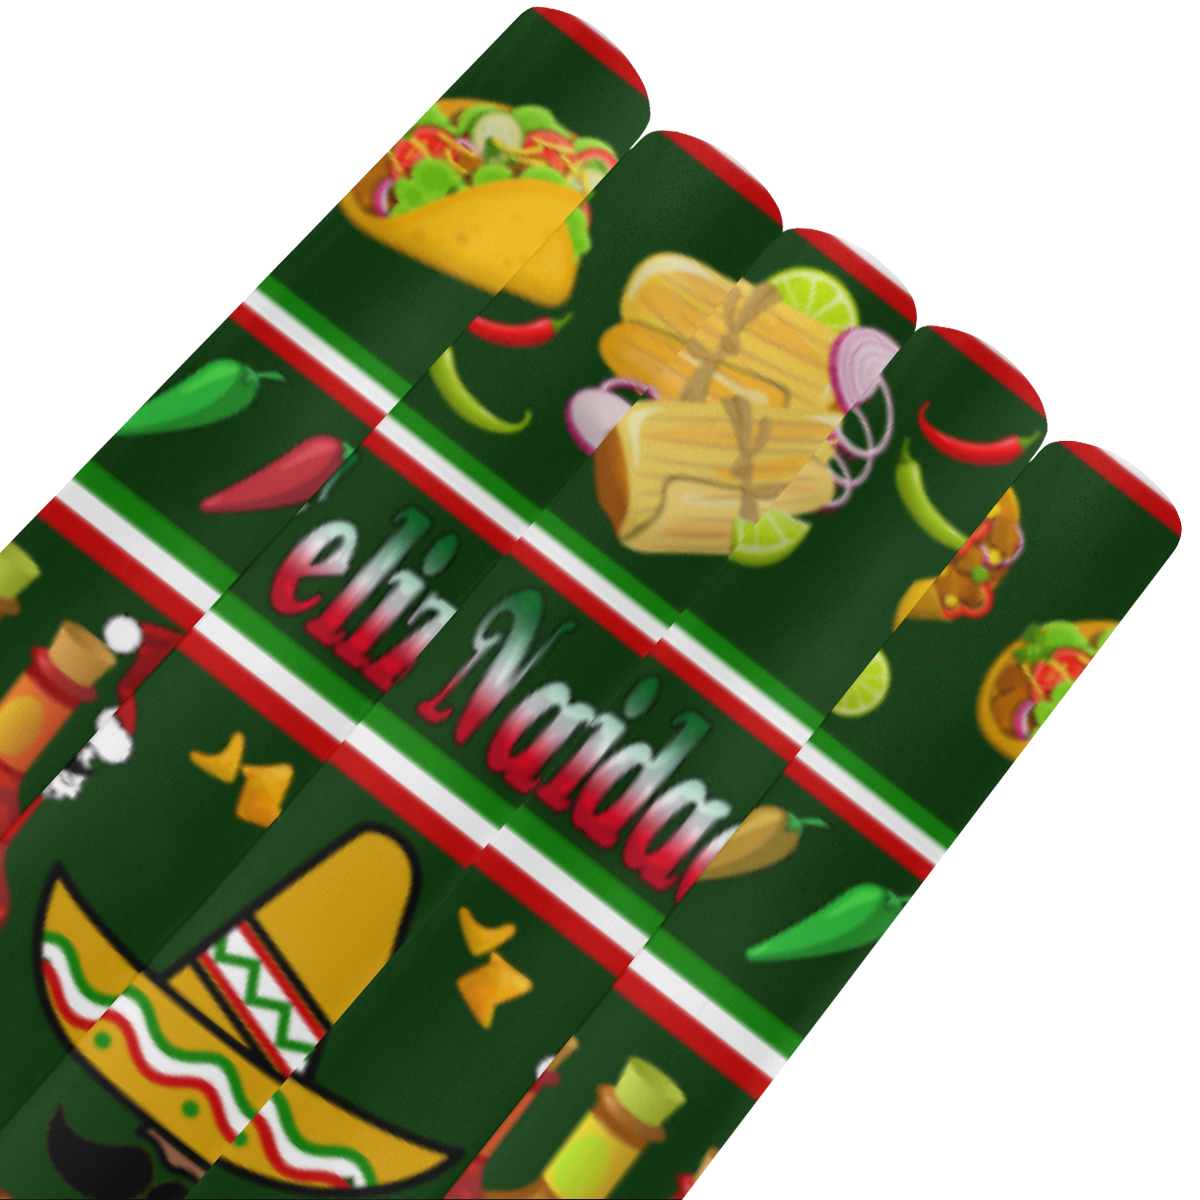 Feliz Navidad Ugly Sweater on Green Gift Wrapping Paper 58"x 23" (5 Rolls)